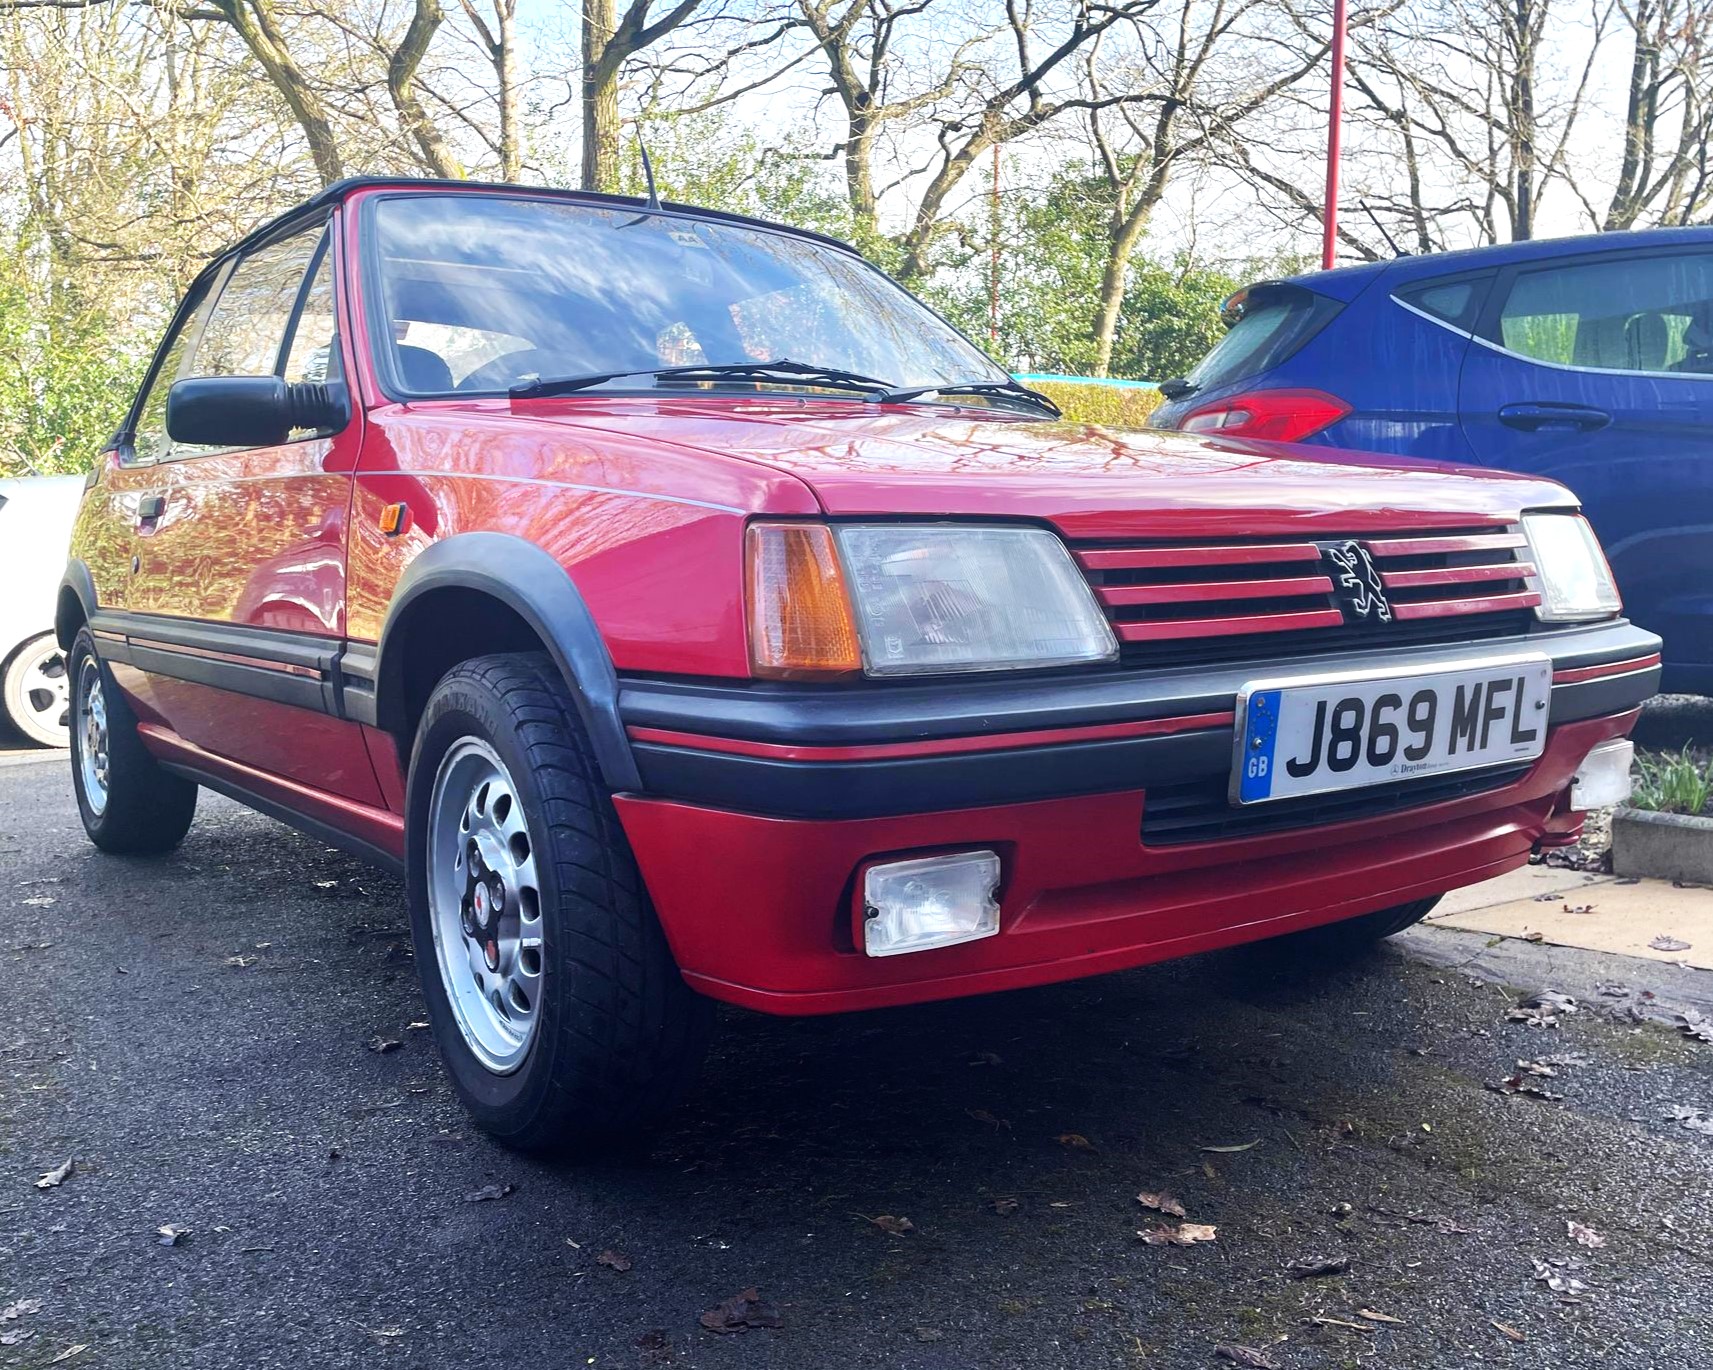 Peugeot 205 Cti 1.6 convertible - Mot'd 83,000 miles This stunning low mileage car has been - Image 4 of 18